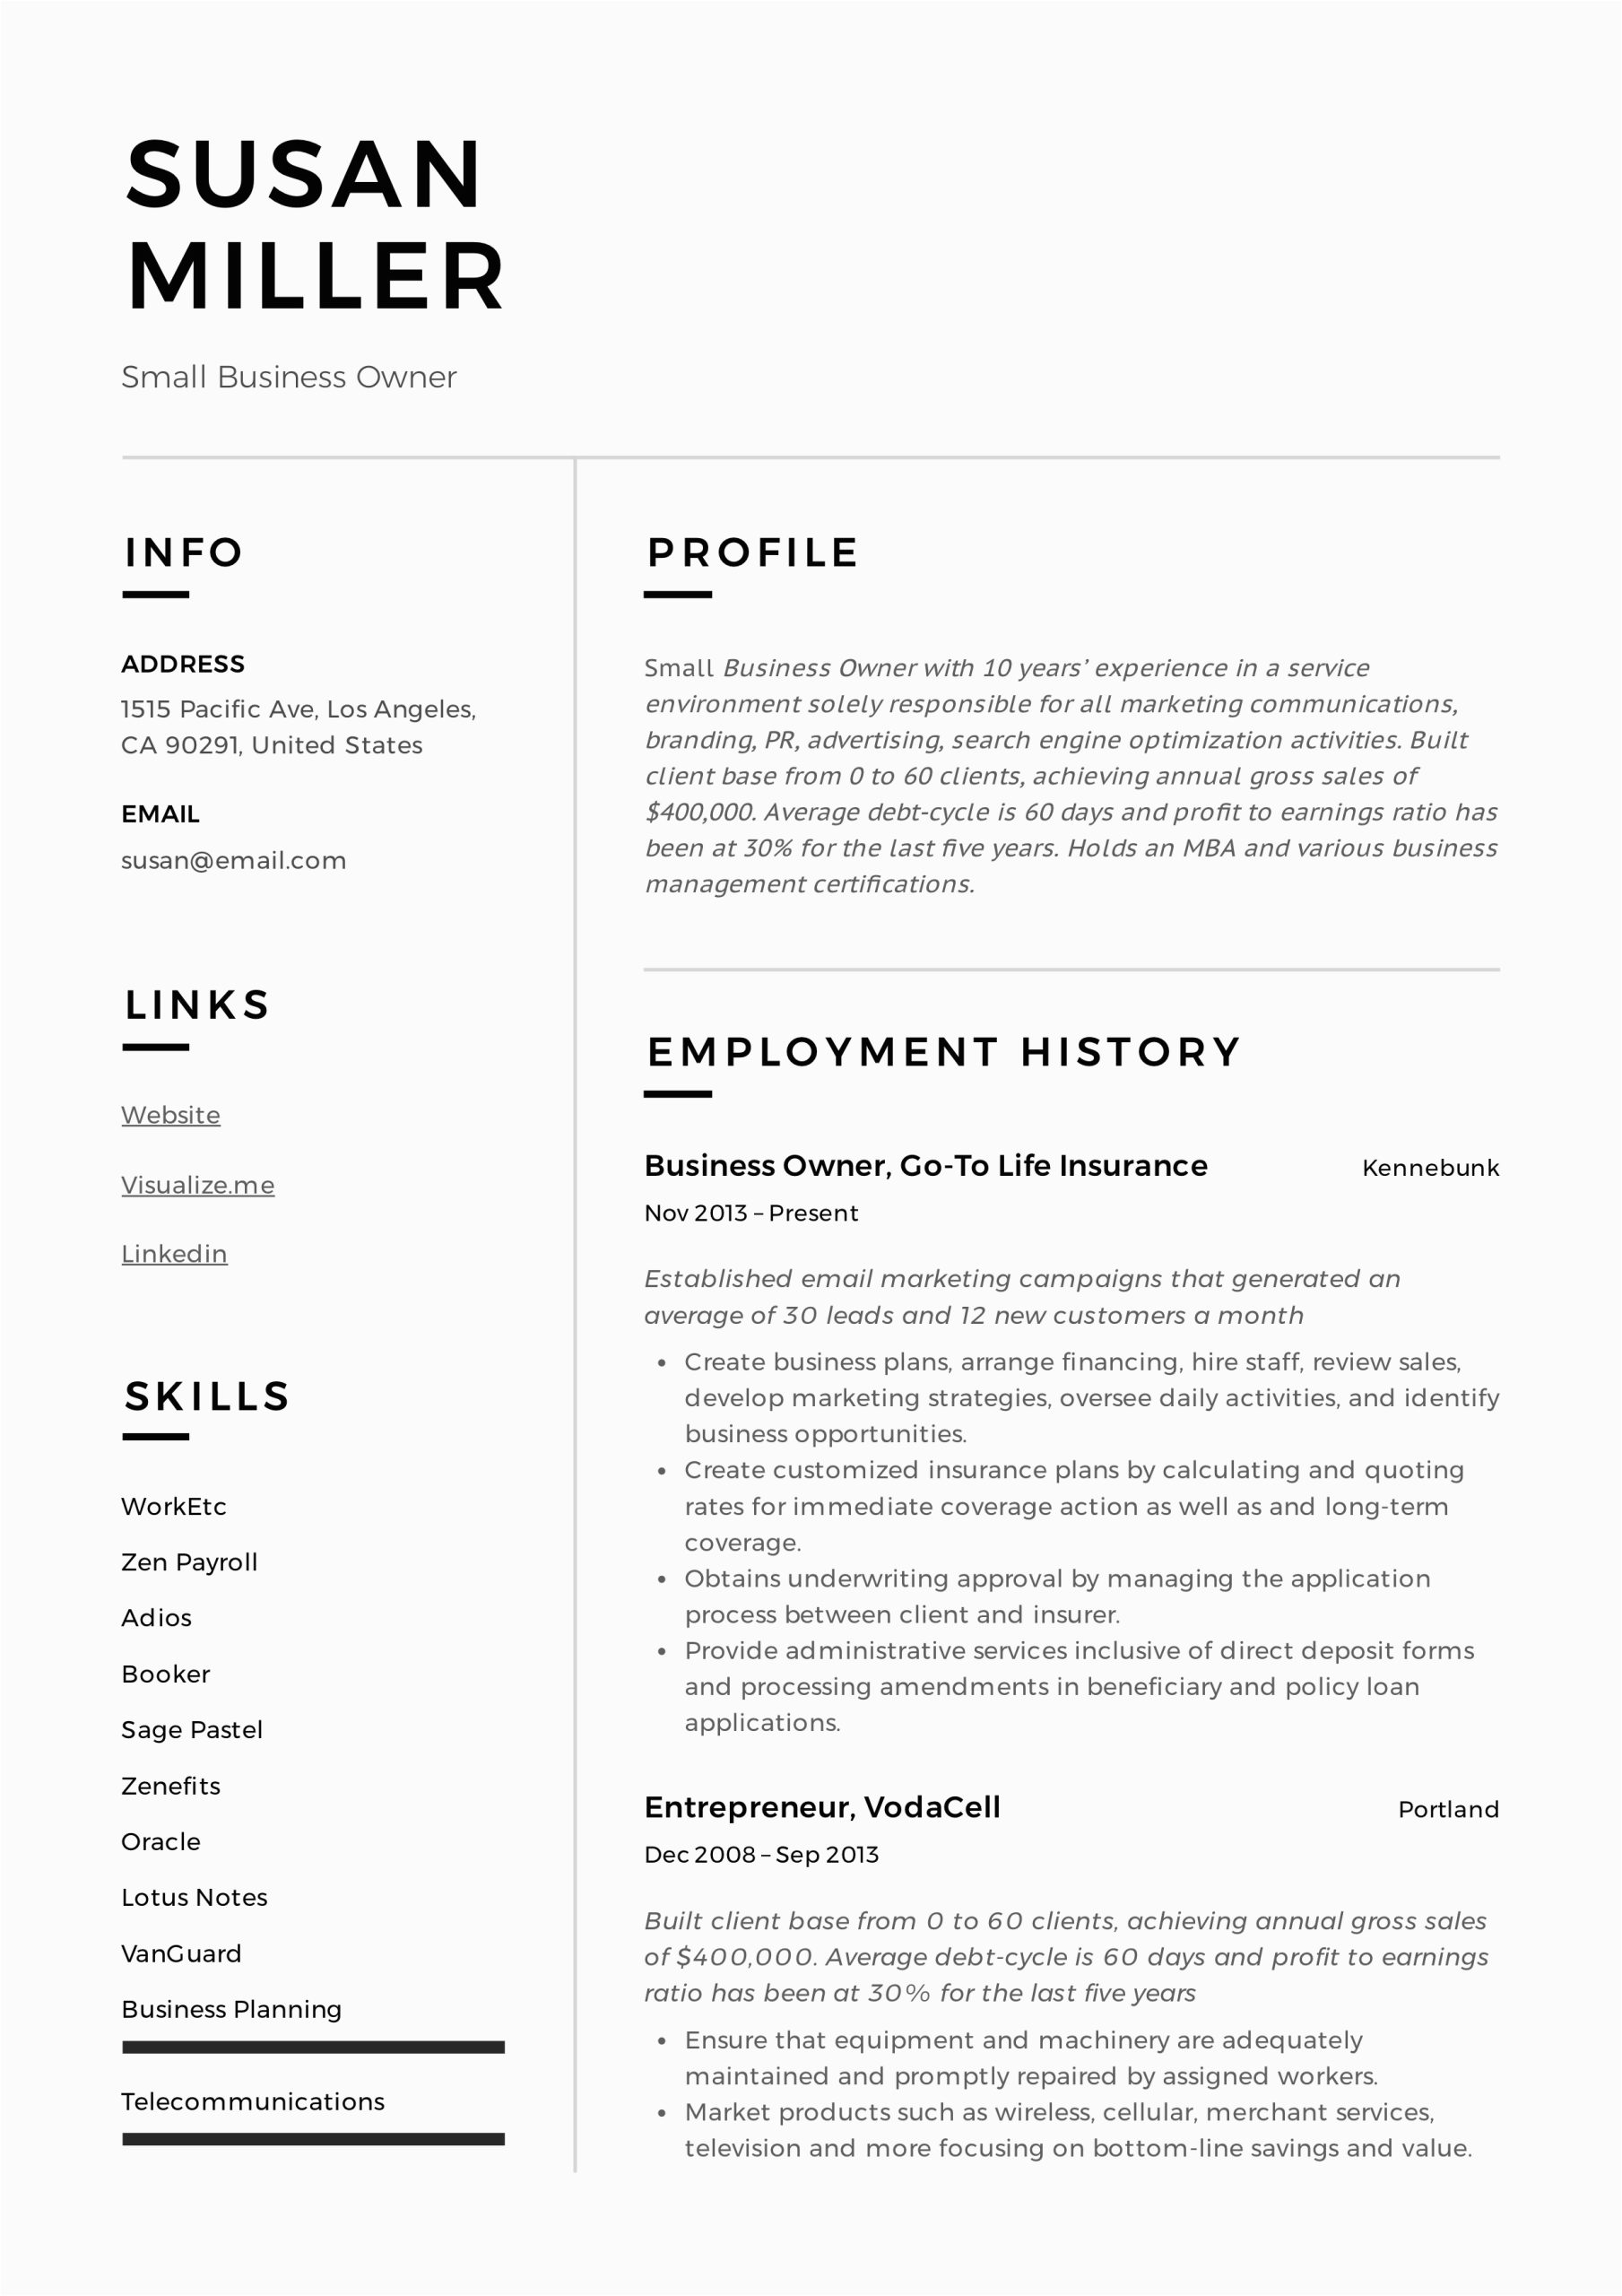 Resume Sample for One Job Title but 2 Diferent Company Small Business Owner Resume Guide 12 Examples Pdf